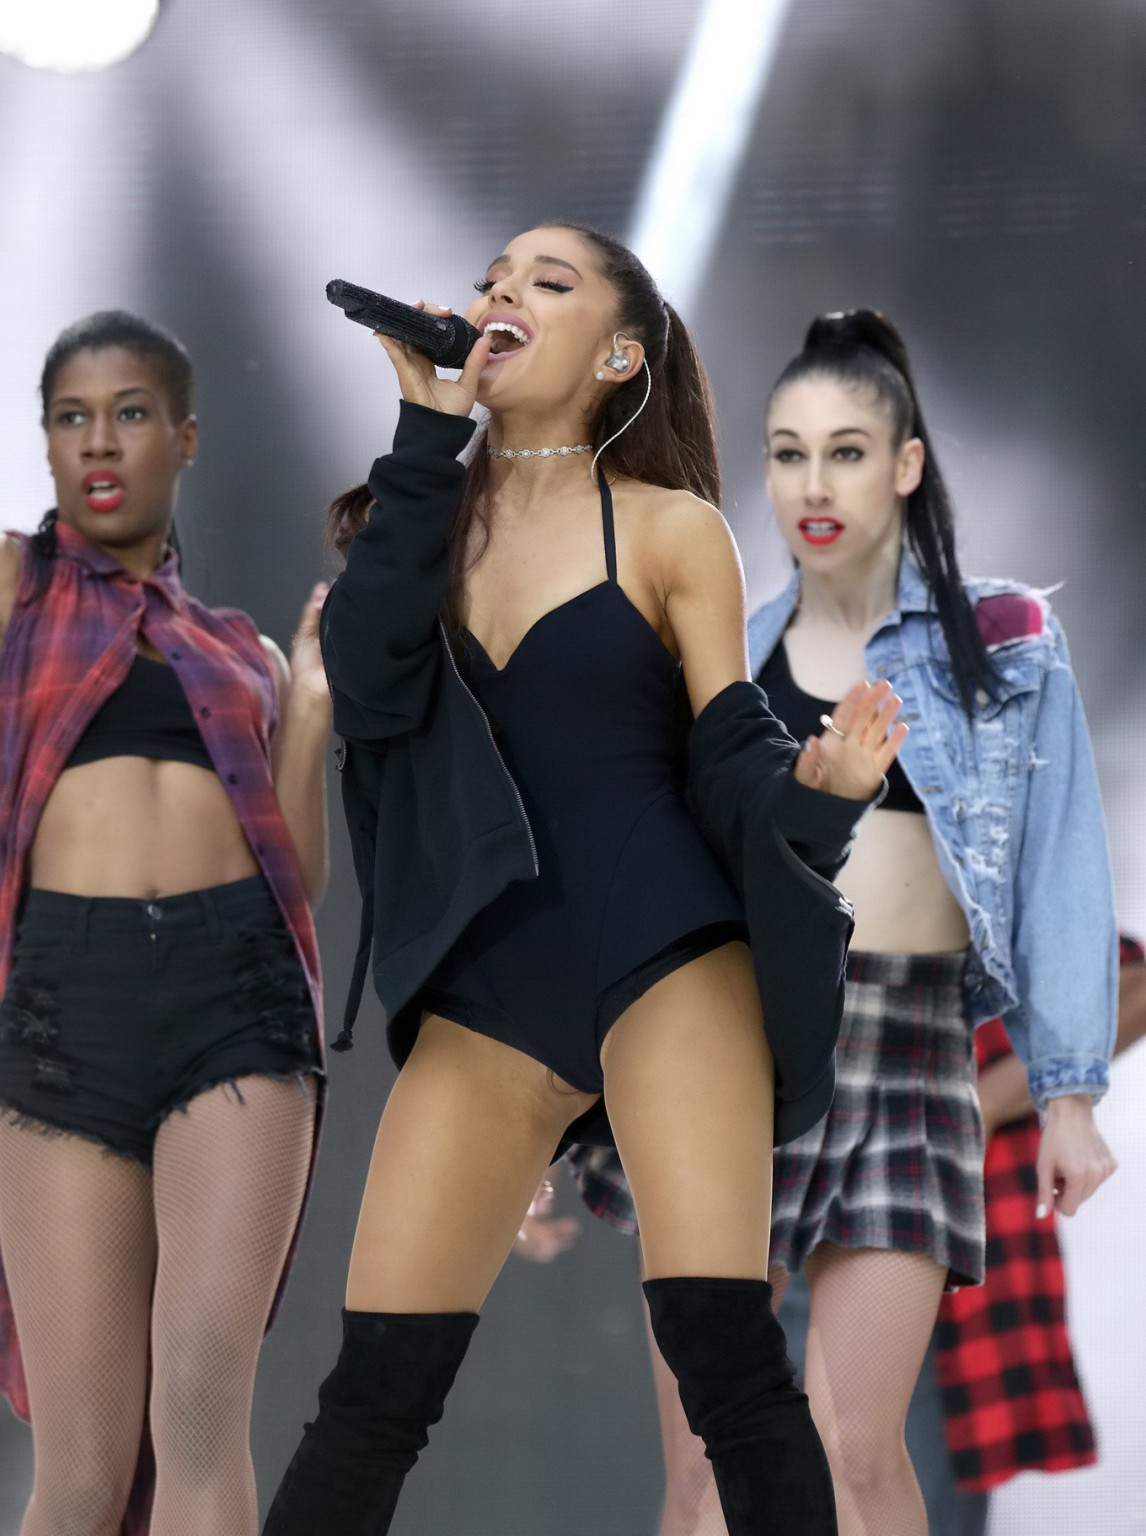 Ariana Grande shows off her shaved pussy in a tiny black outfit while performing #75161911